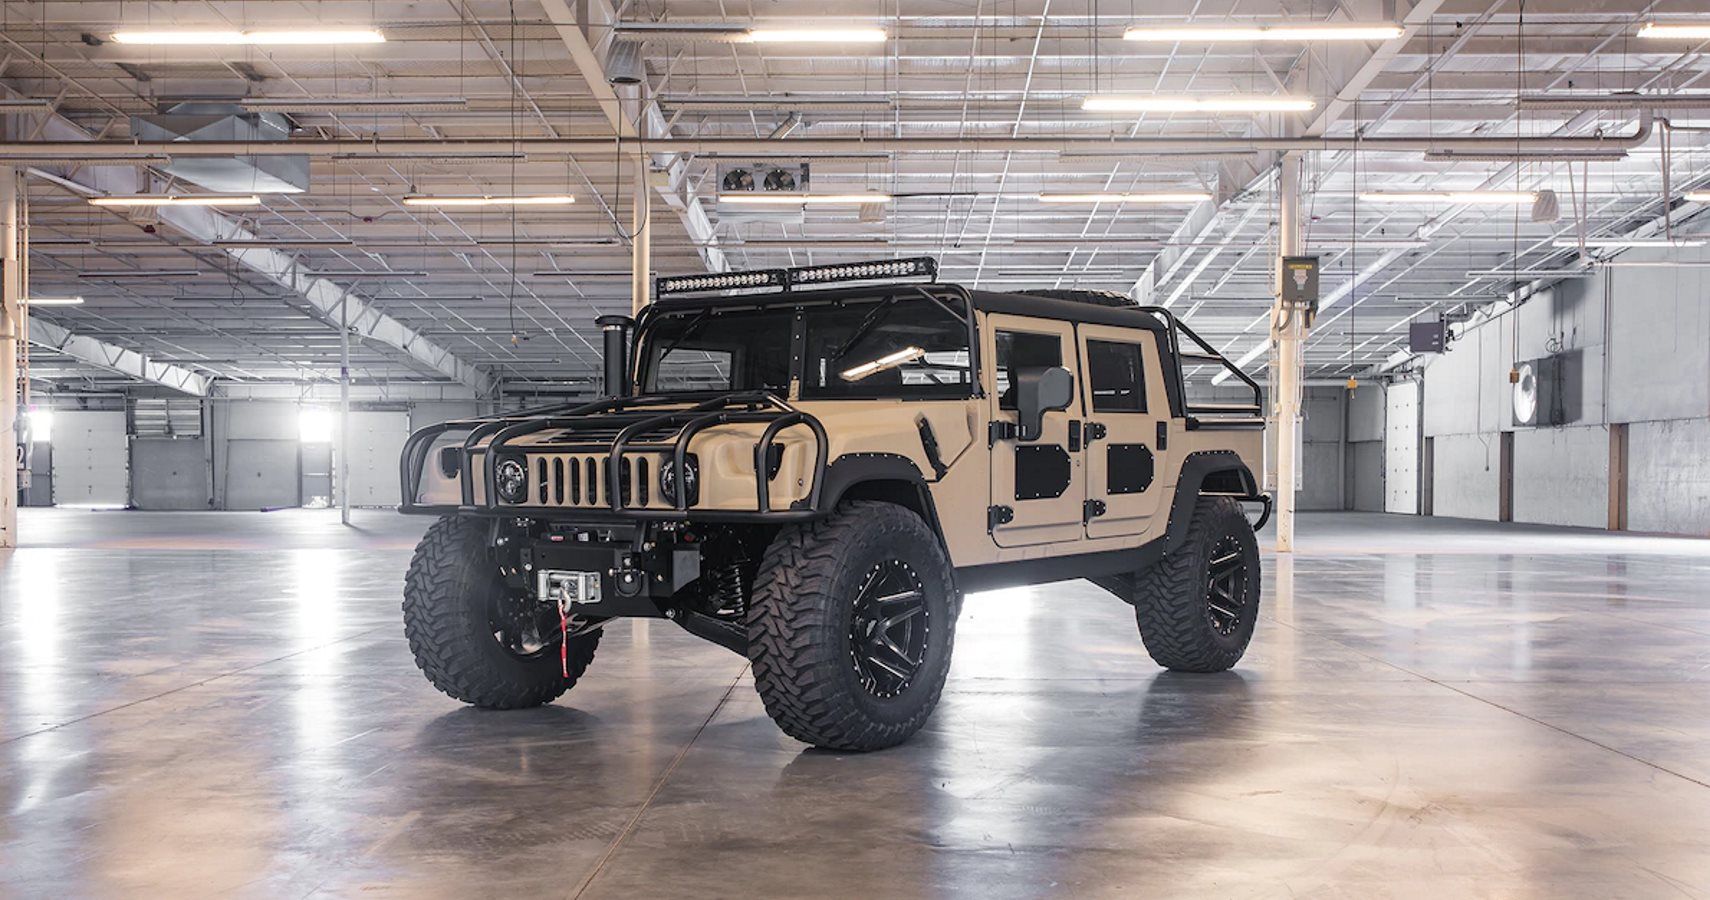 Mil Spec Revamps Hummer H1 To Make It Even More Of An Off-Road Monster